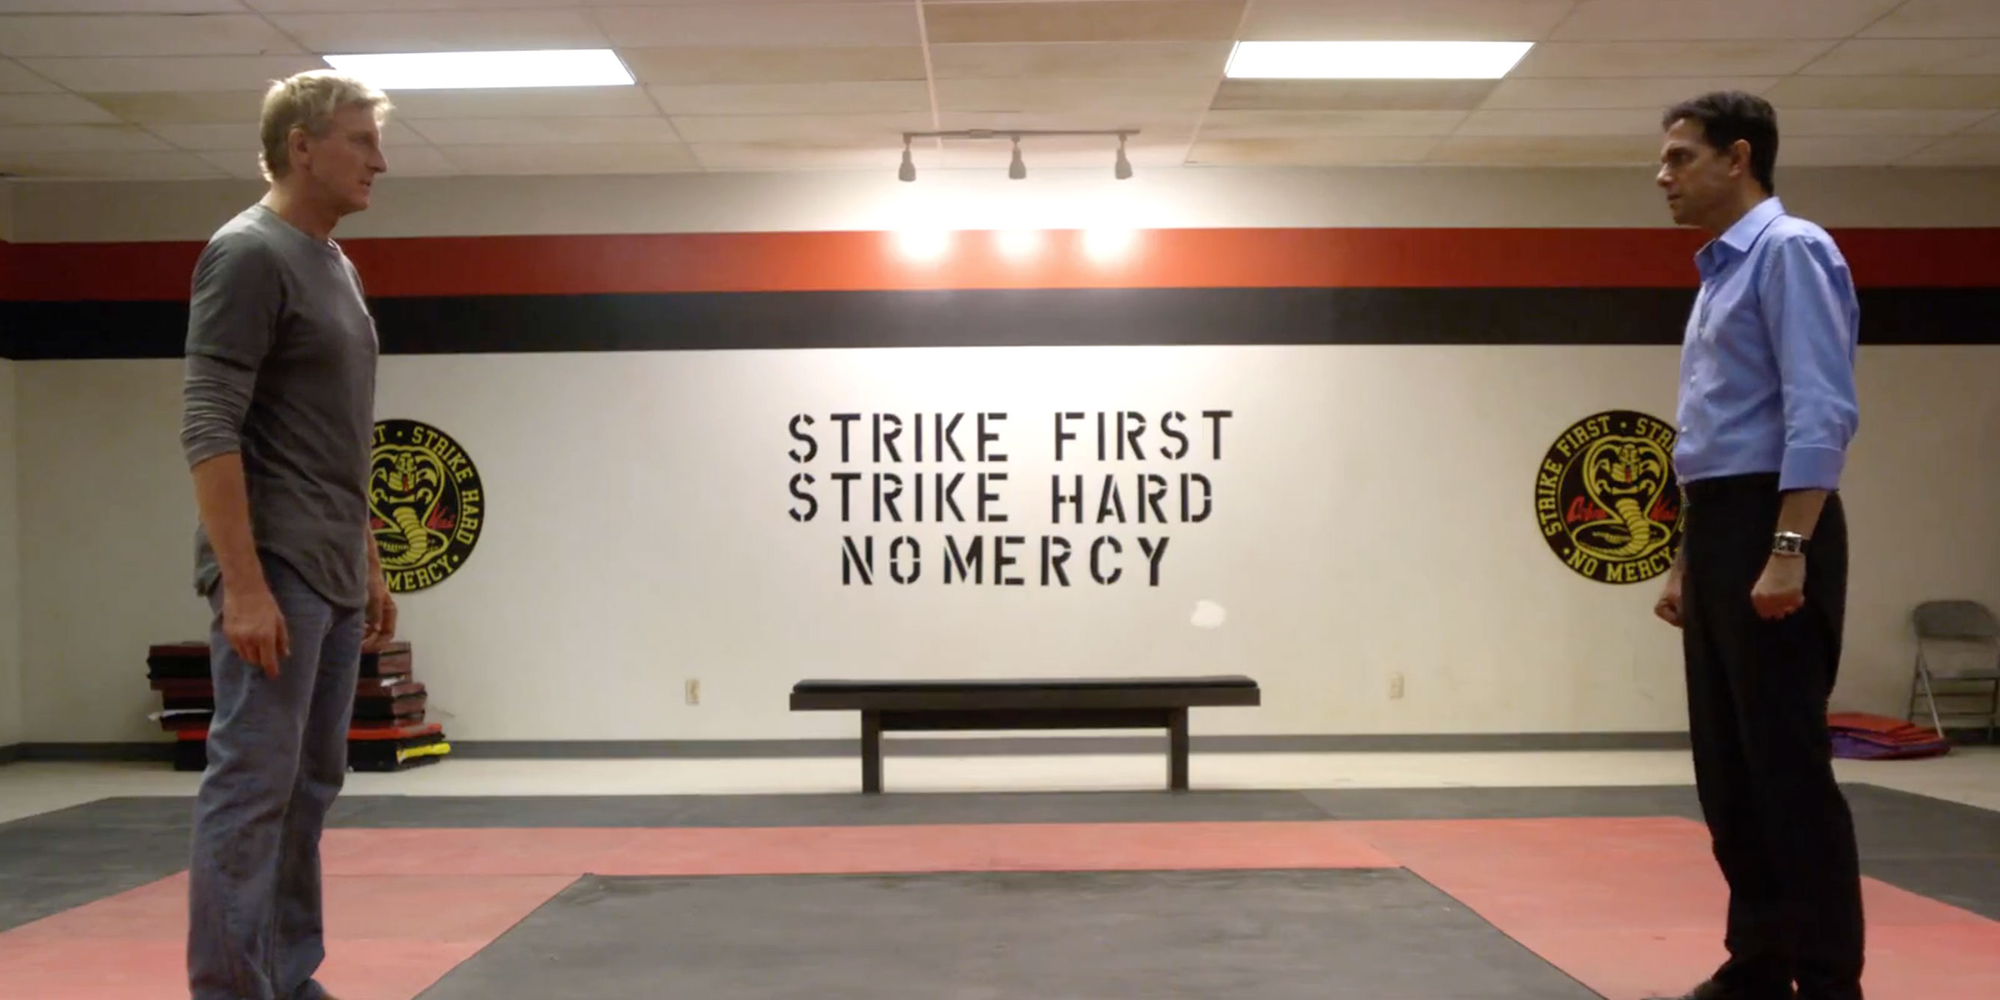 Johnny and Daniel face off in the Cobra Kai dojo. Visible between them on the wall is the Cobra Kai motto: Strike first, strike hard, no mercy.